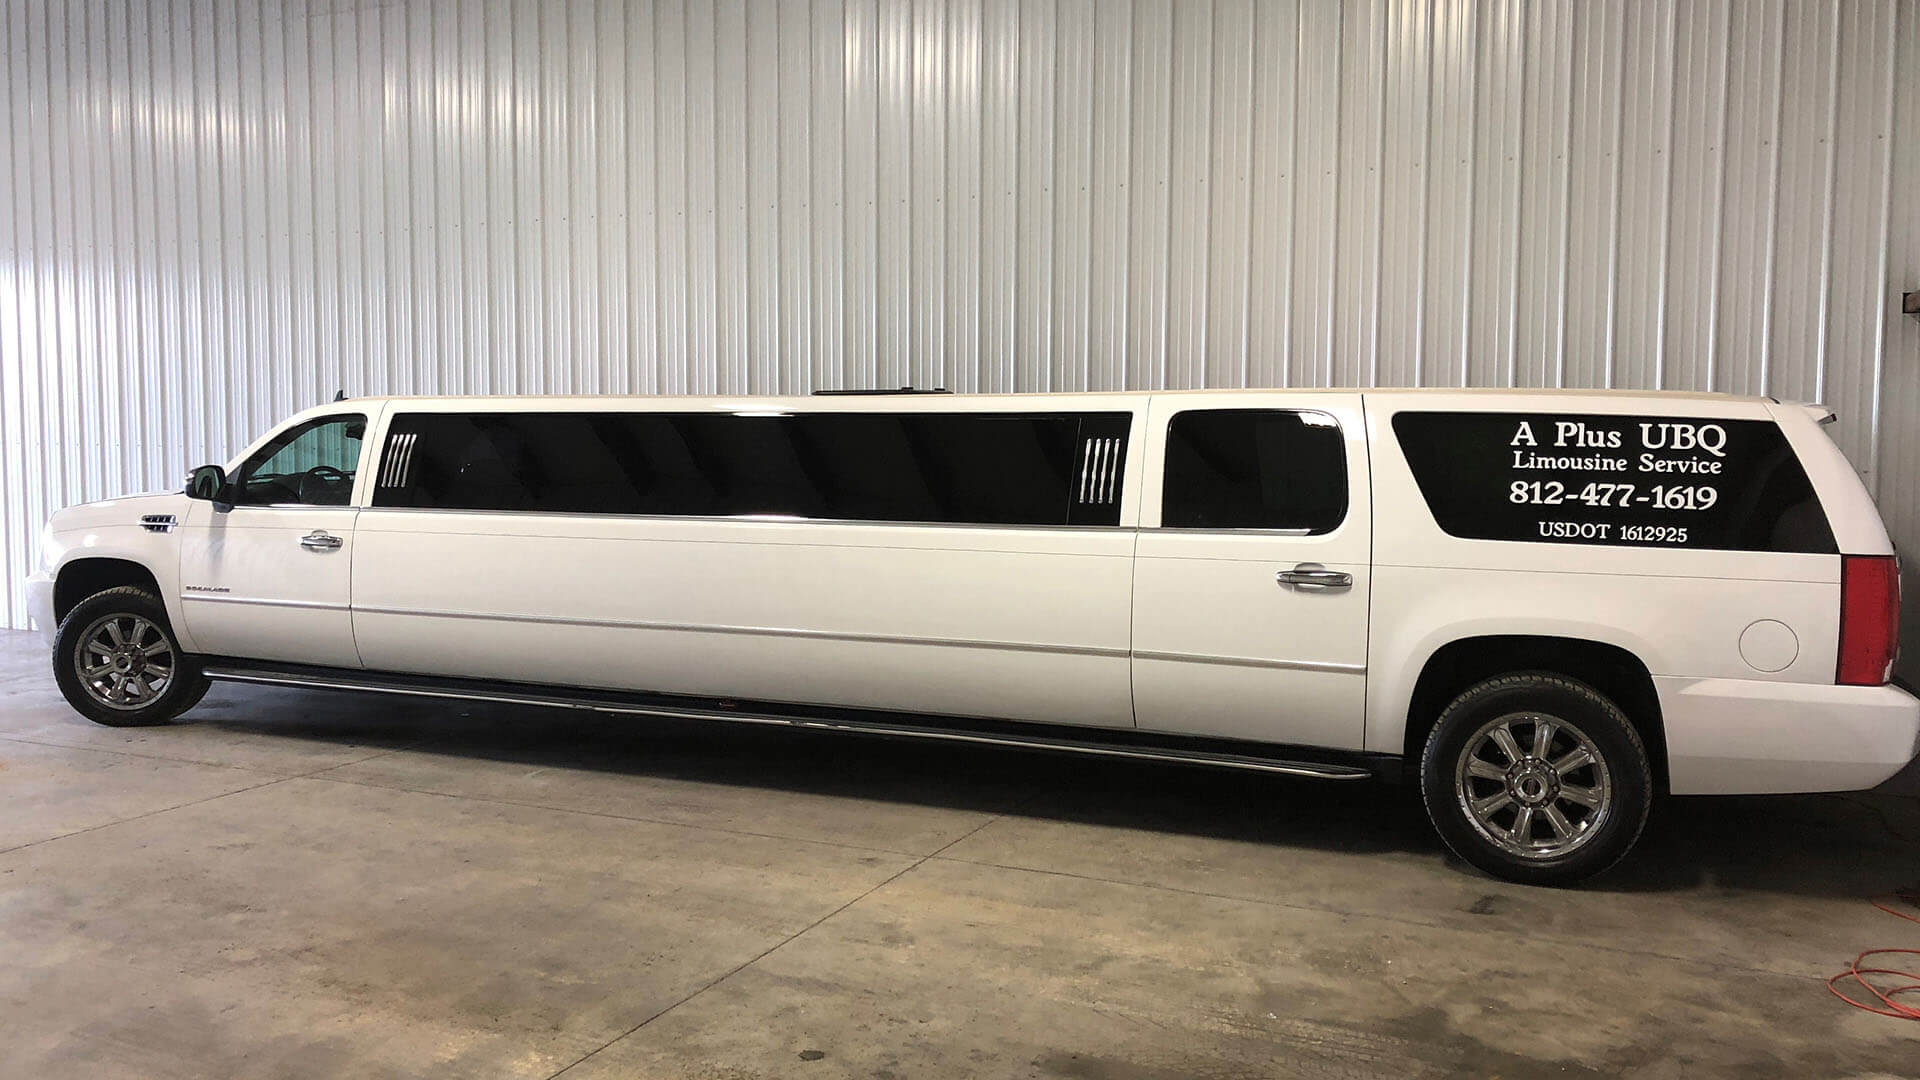 Airport Pick-up Limousine Service (white limo)